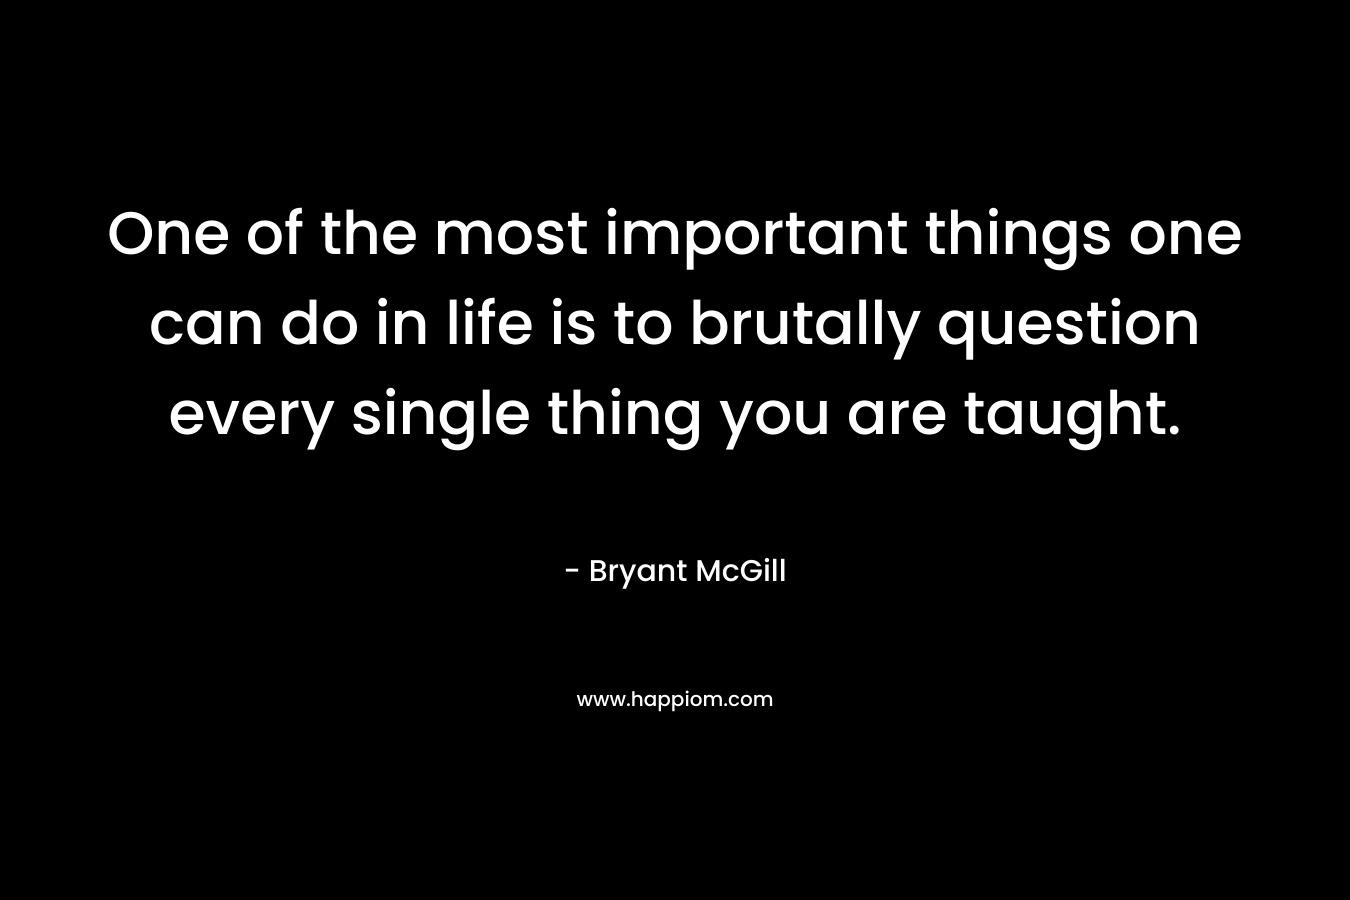 One of the most important things one can do in life is to brutally question every single thing you are taught.